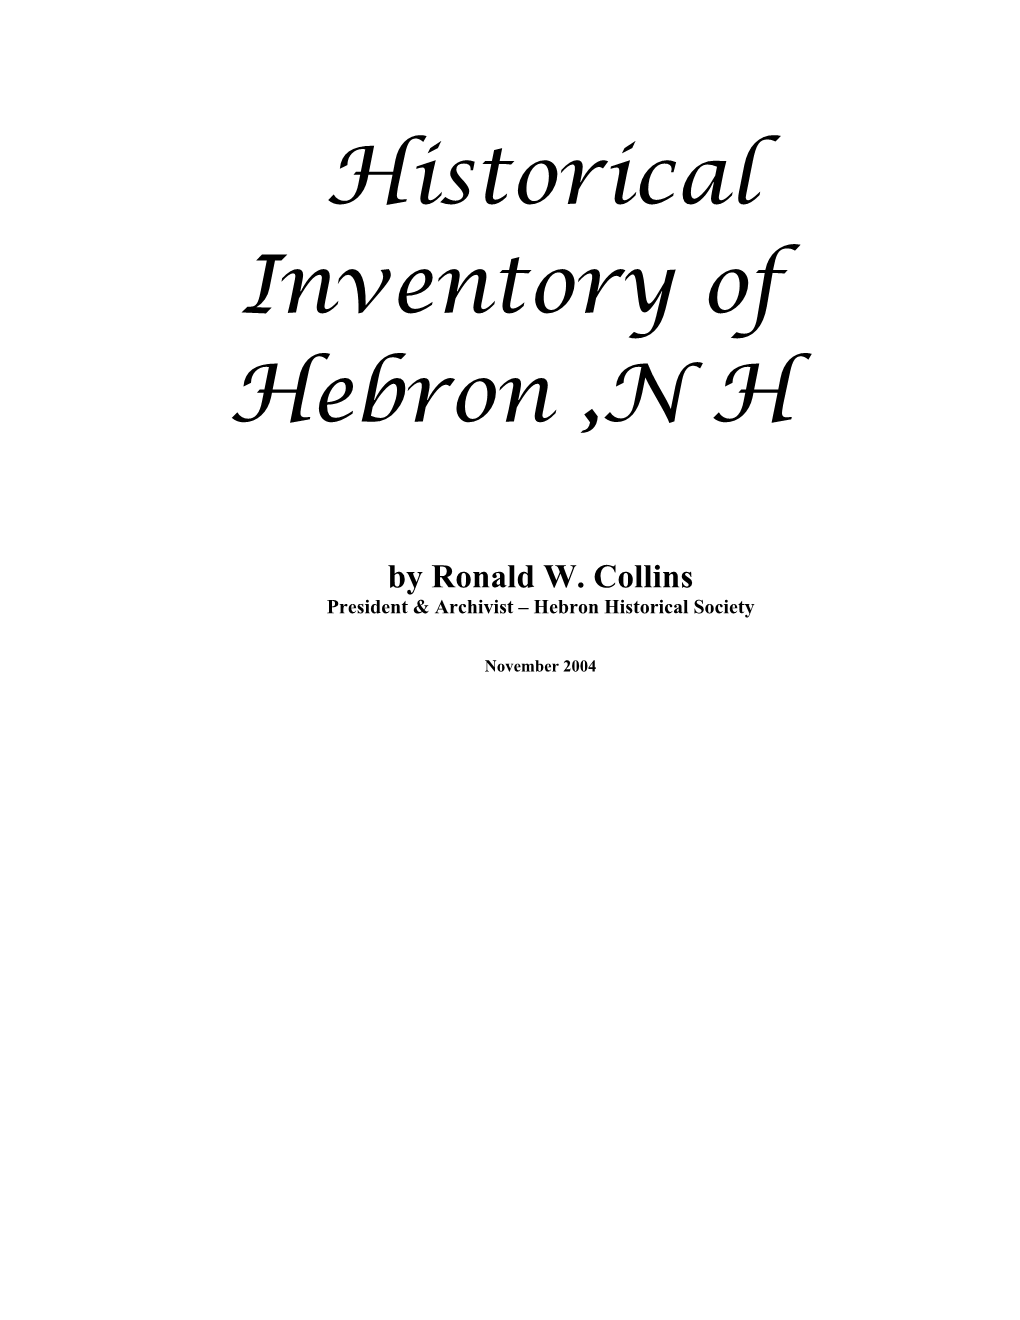 Historical Inventory of Hebron ,N H